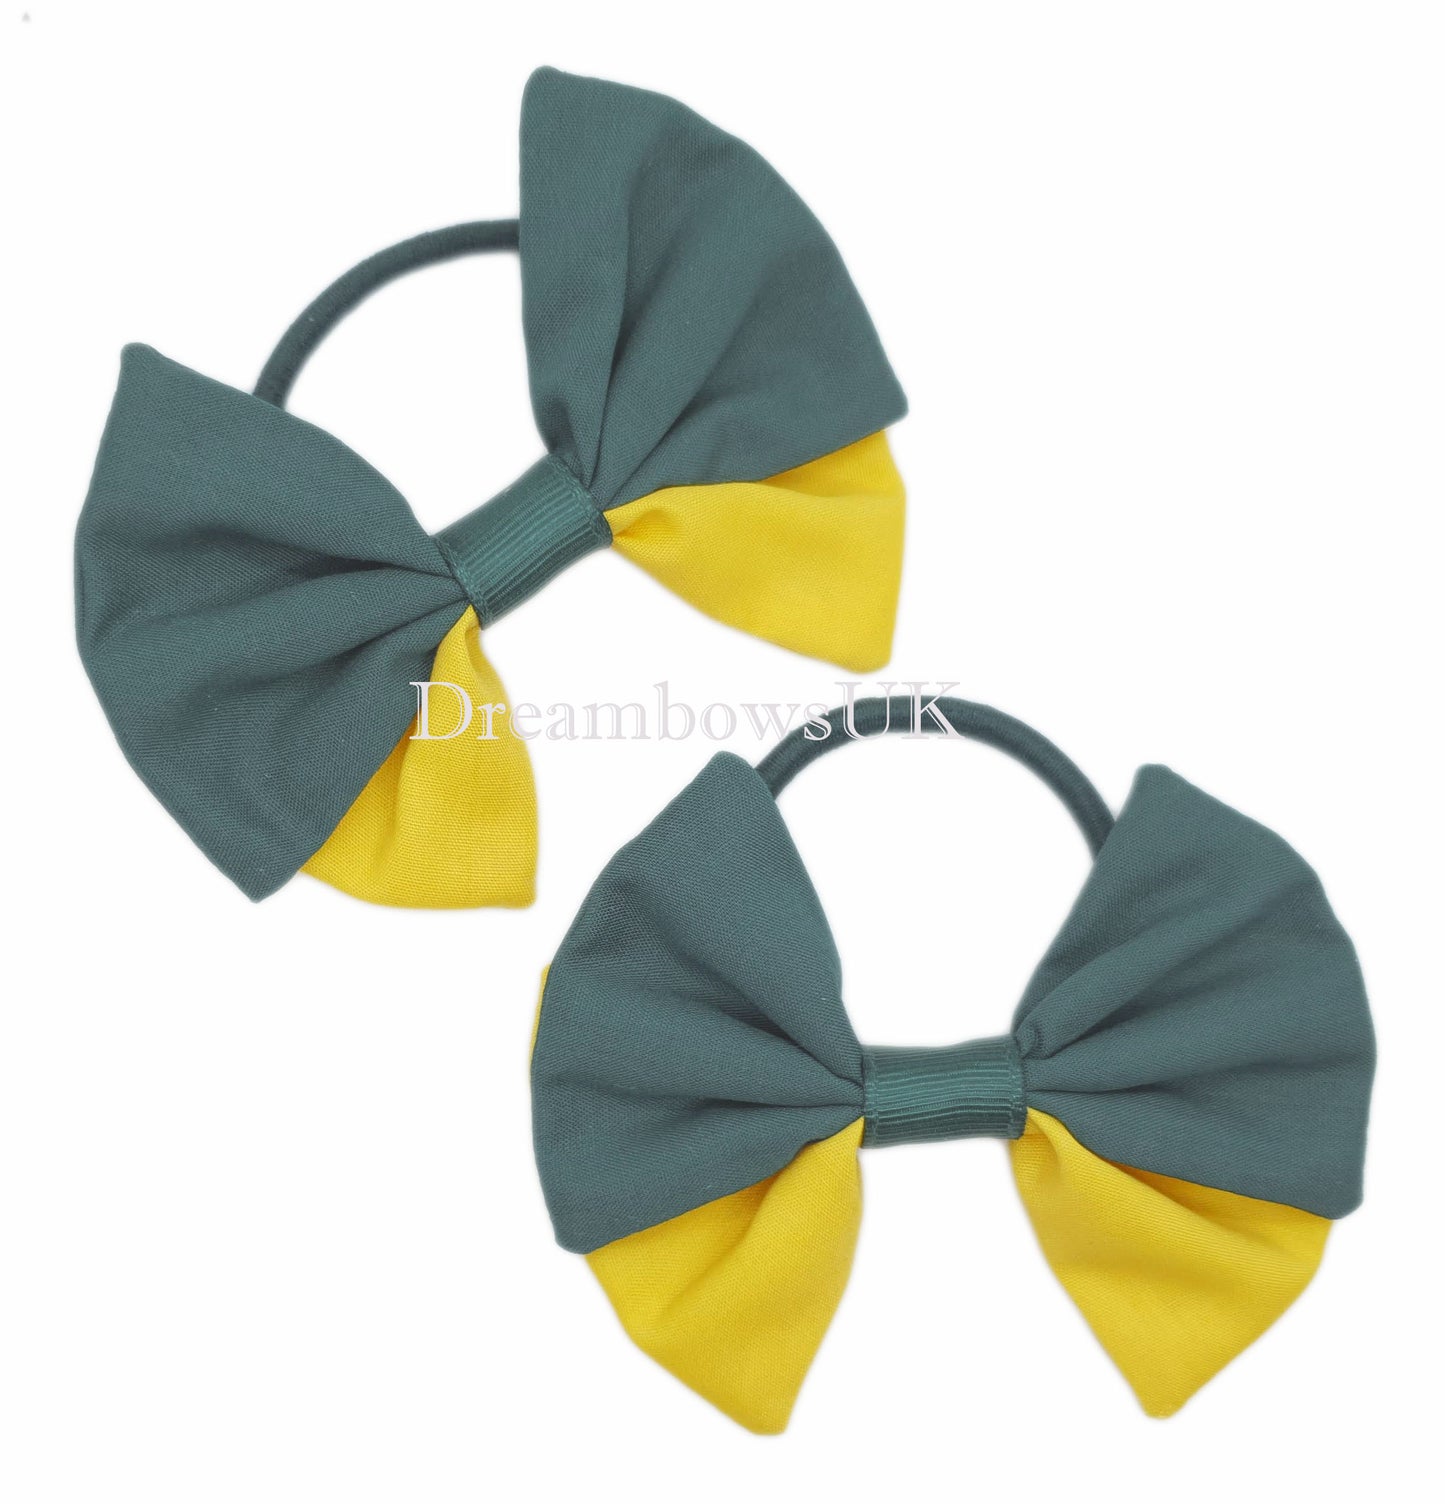 2x Grey and golden yellow fabric hair bows